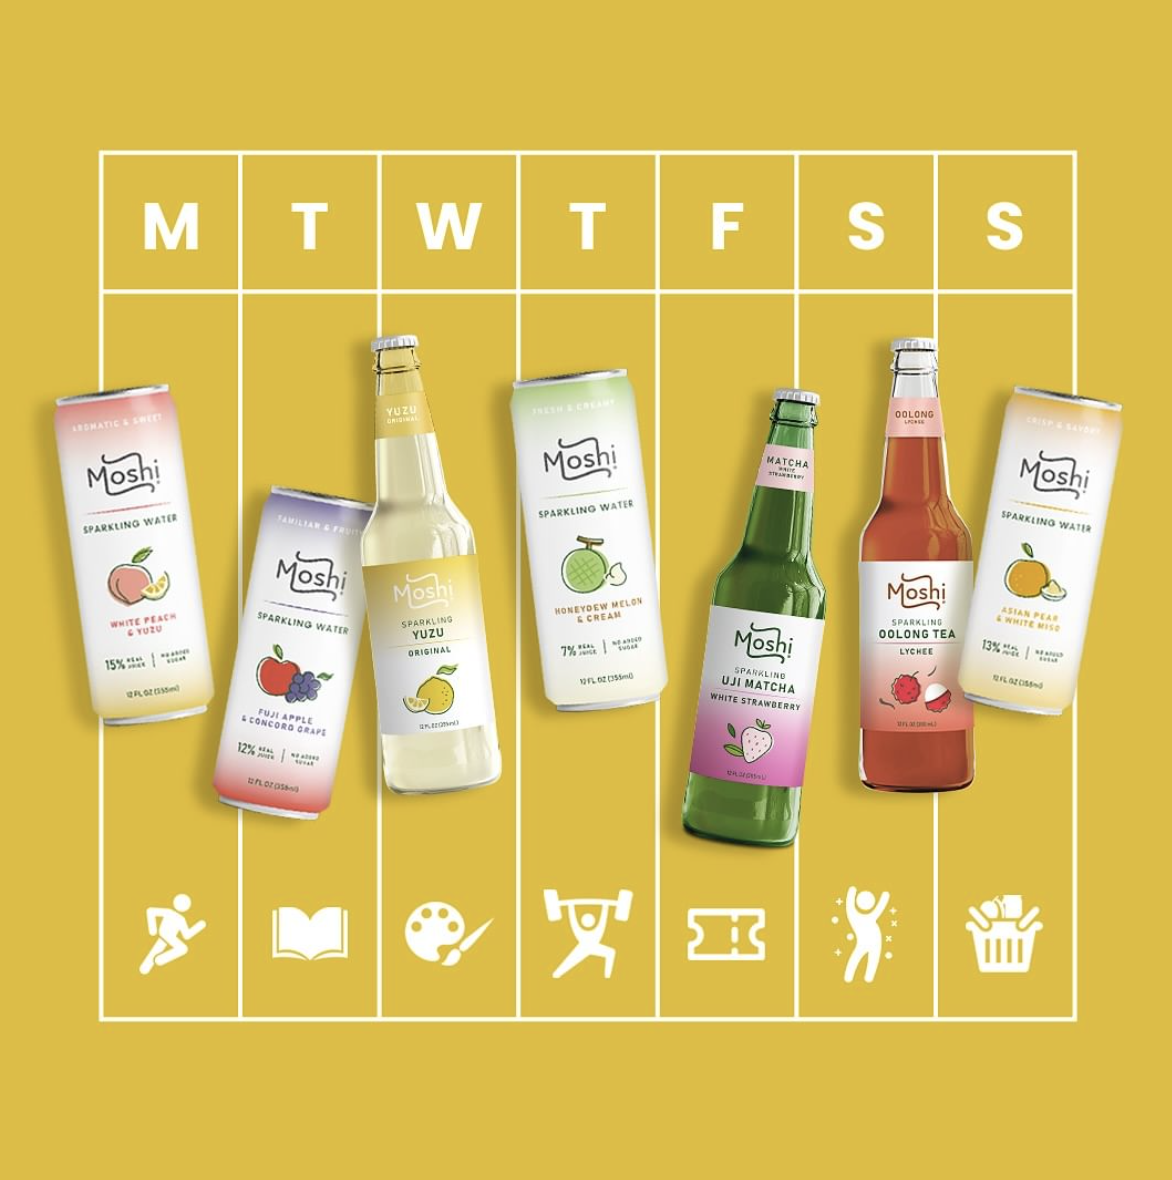 Seven bottles of Moshi sparkling beverages arranged by days of the week with related icons, promoting daily variety